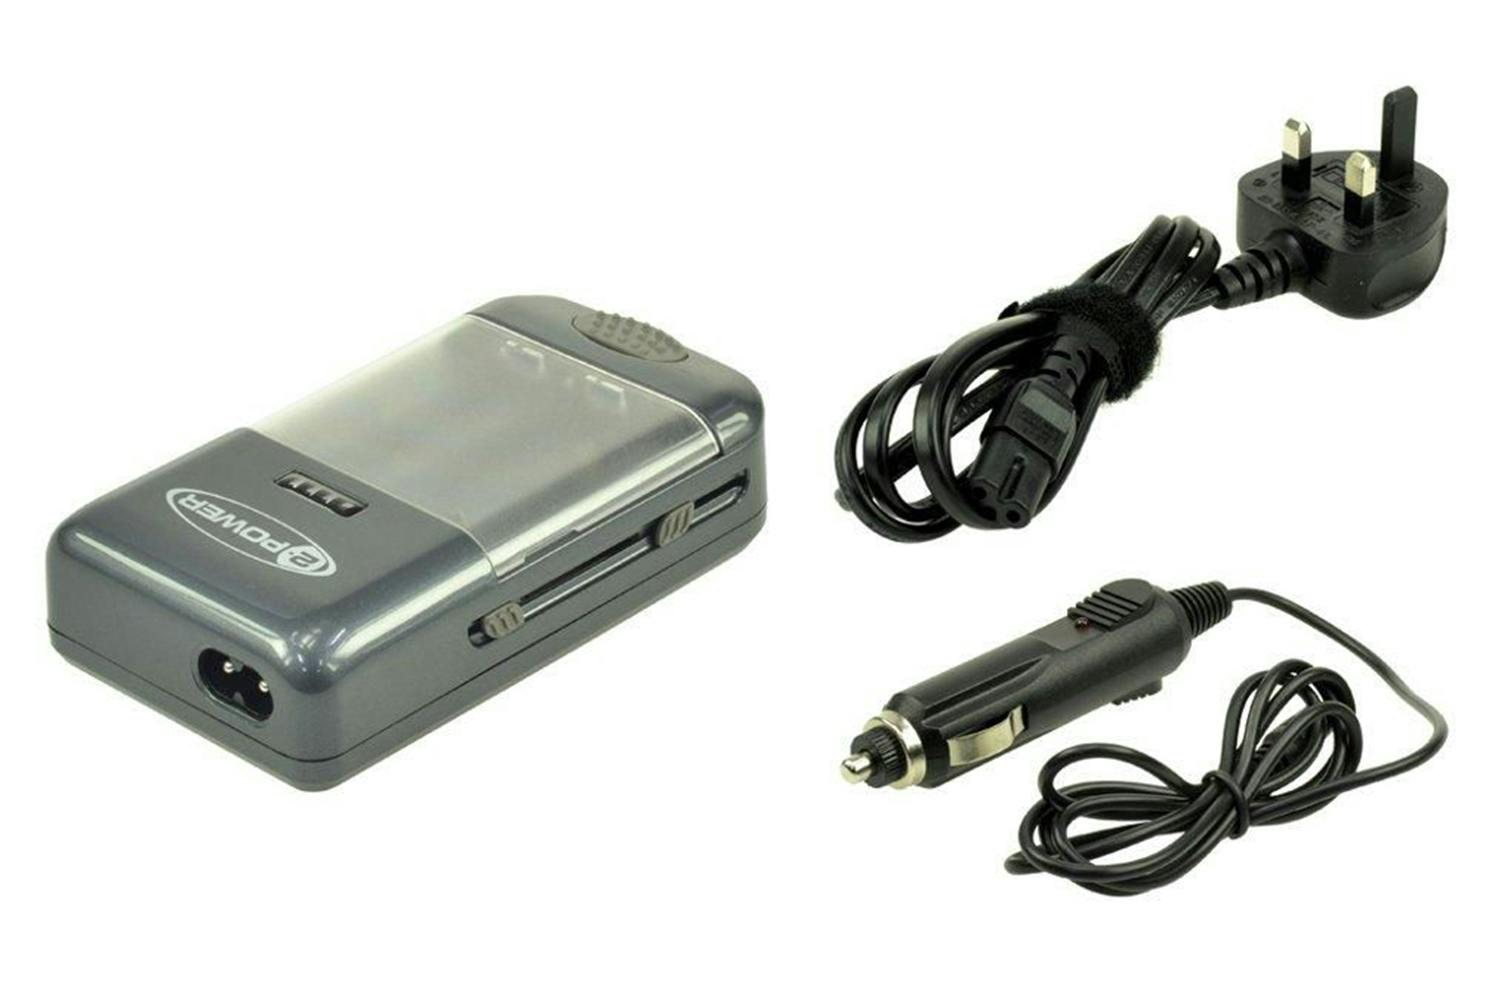 2-Power Universal Camera Battery Charger-Retail